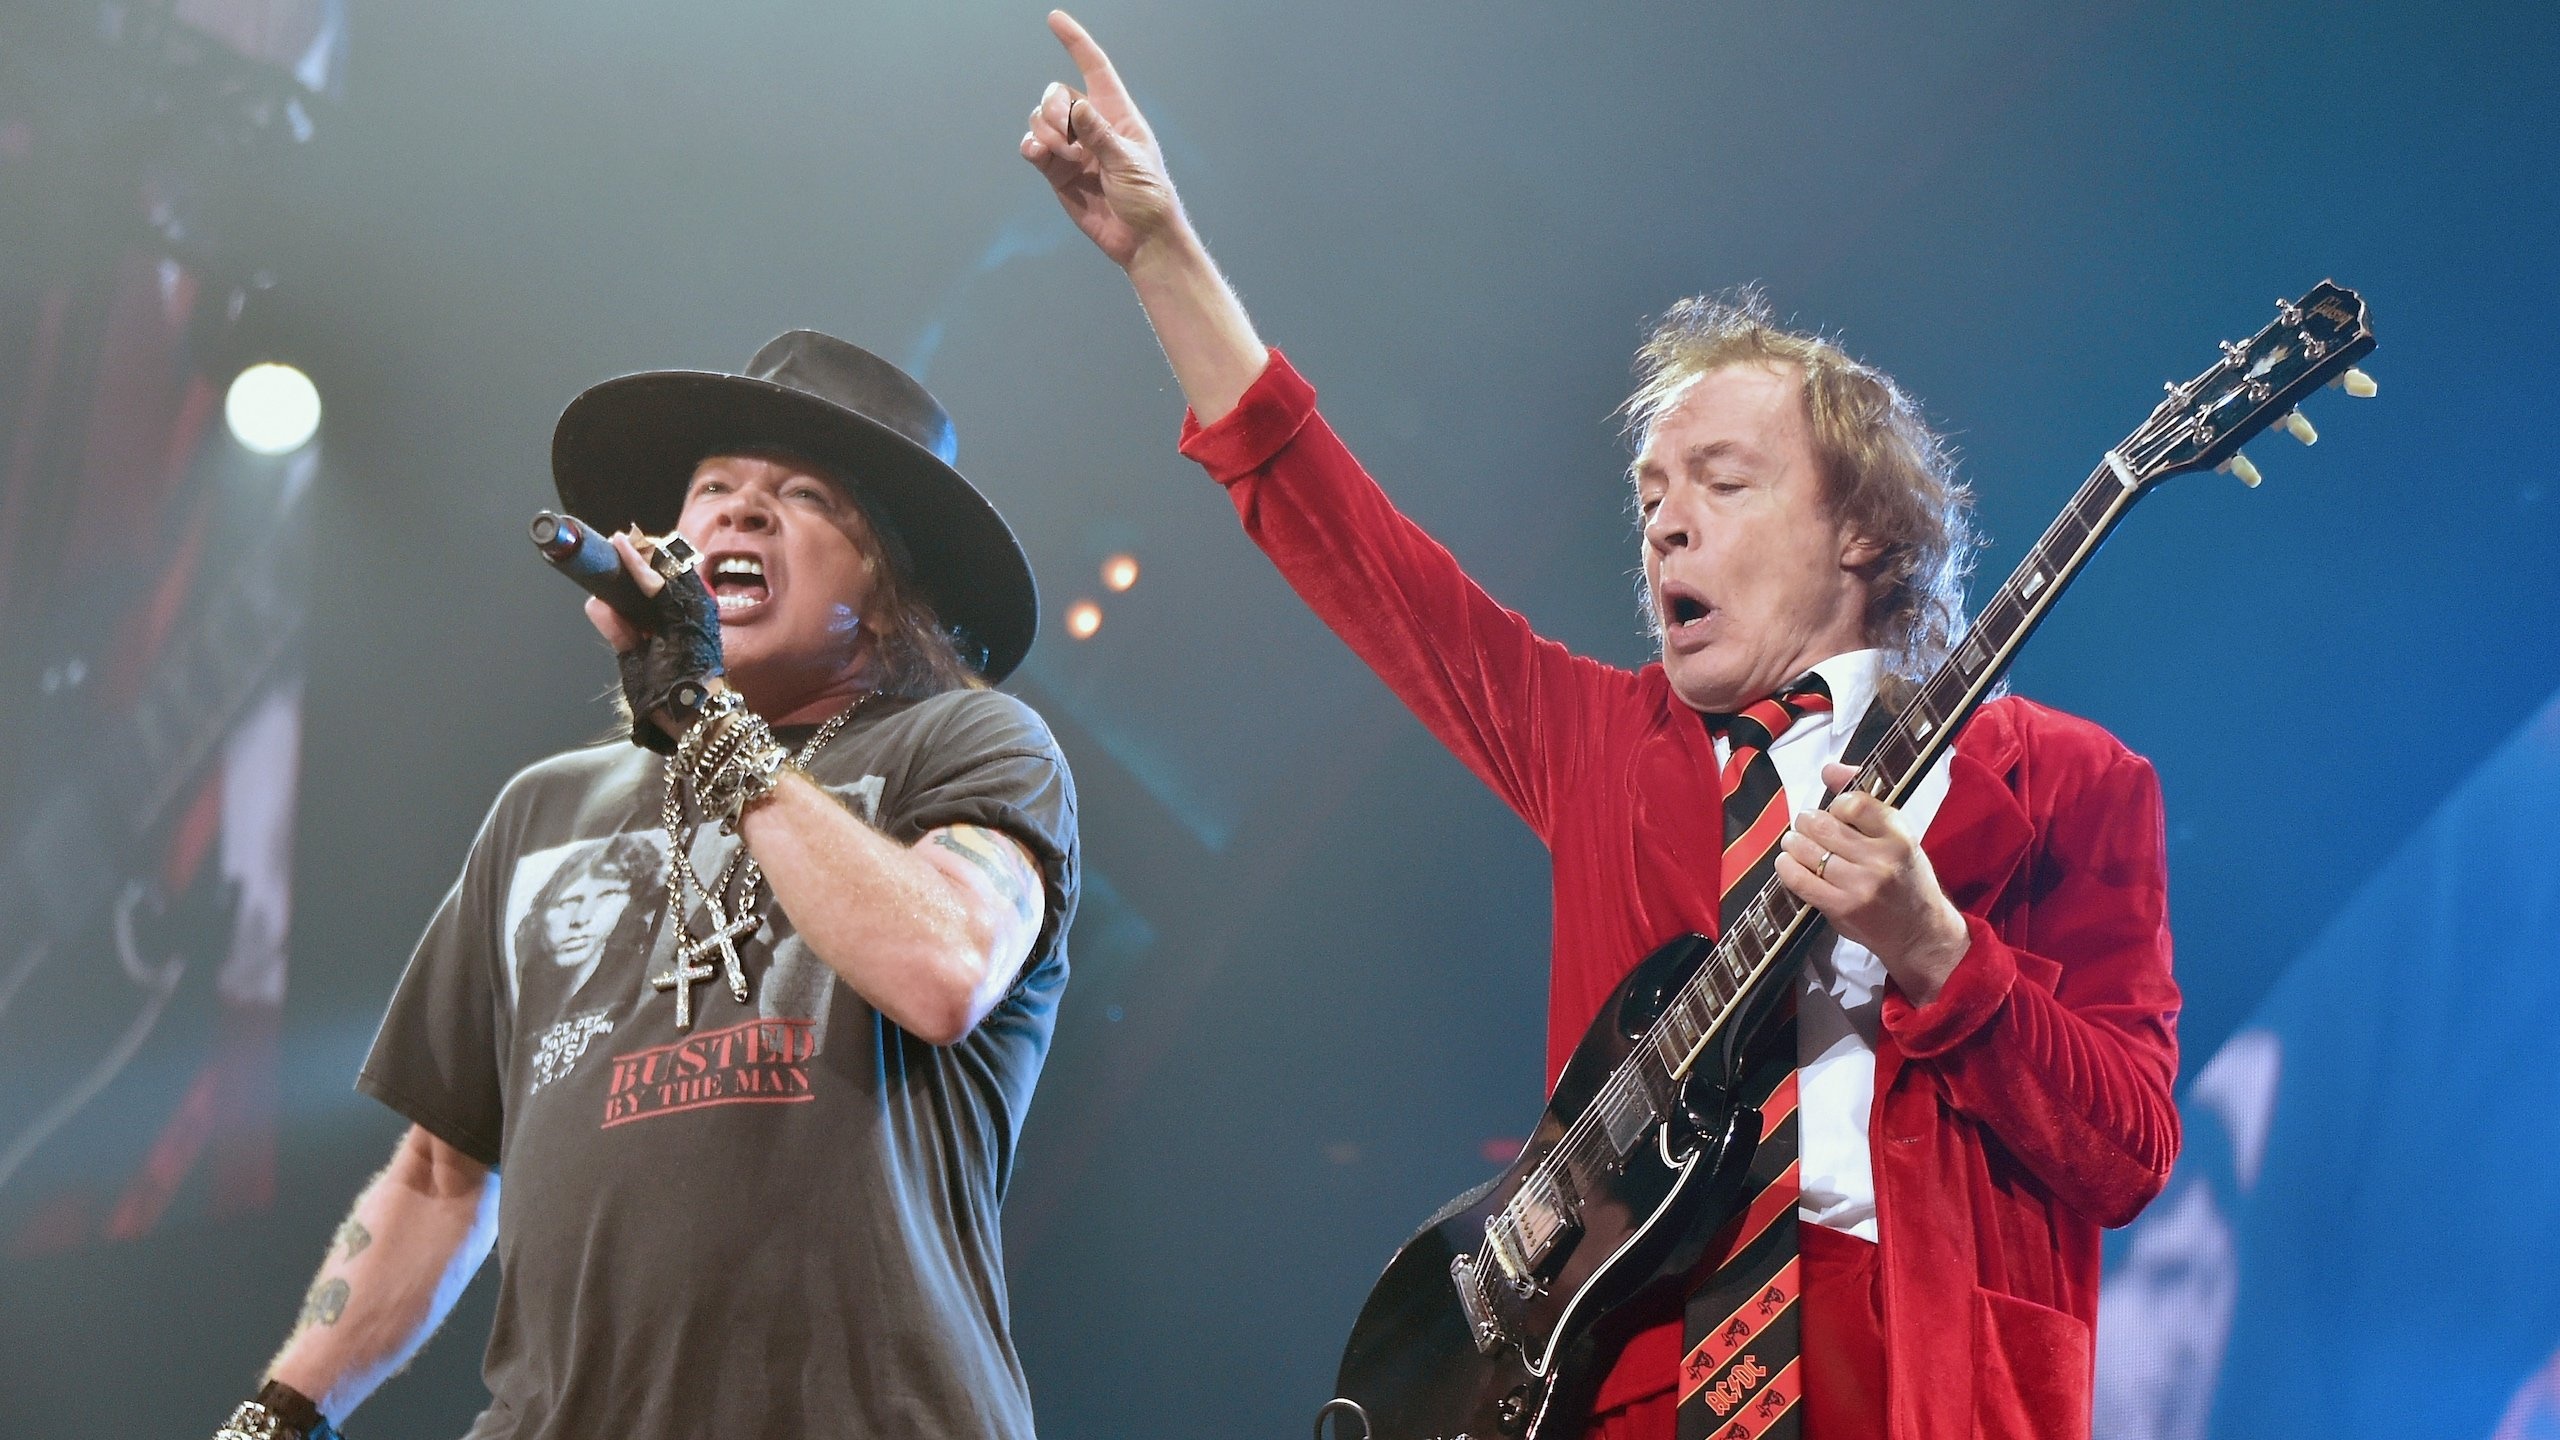 AC/DC Will Allegedly Keep Touring \u0026 Recording New Music With Axl Rose - Music Feeds 2560x1440